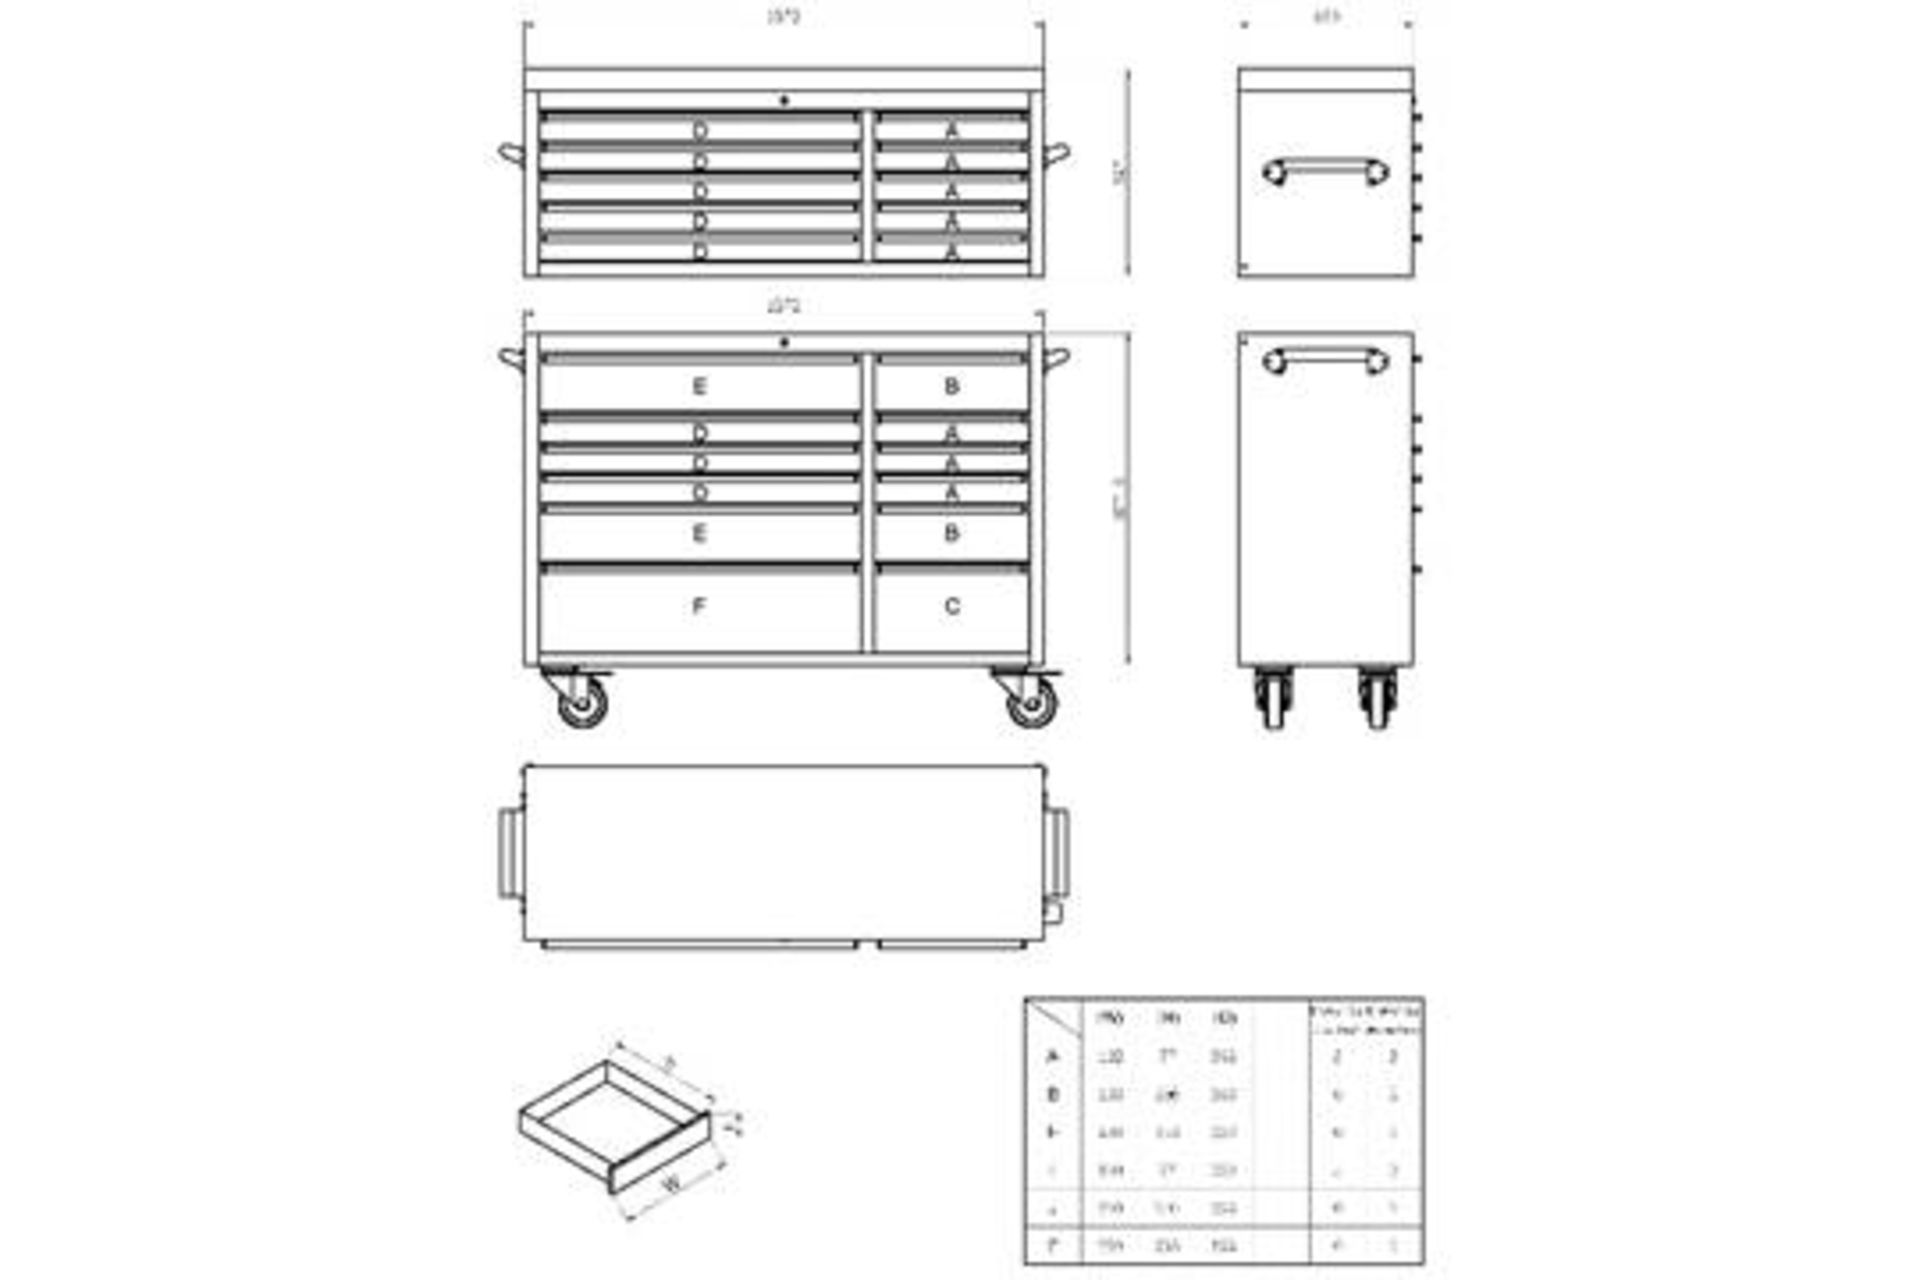 3 units x 54 inch 22 draw stainless steel toolbox 1372mm W x 1550mm H 460mm D NEW and BOXED - Image 2 of 2